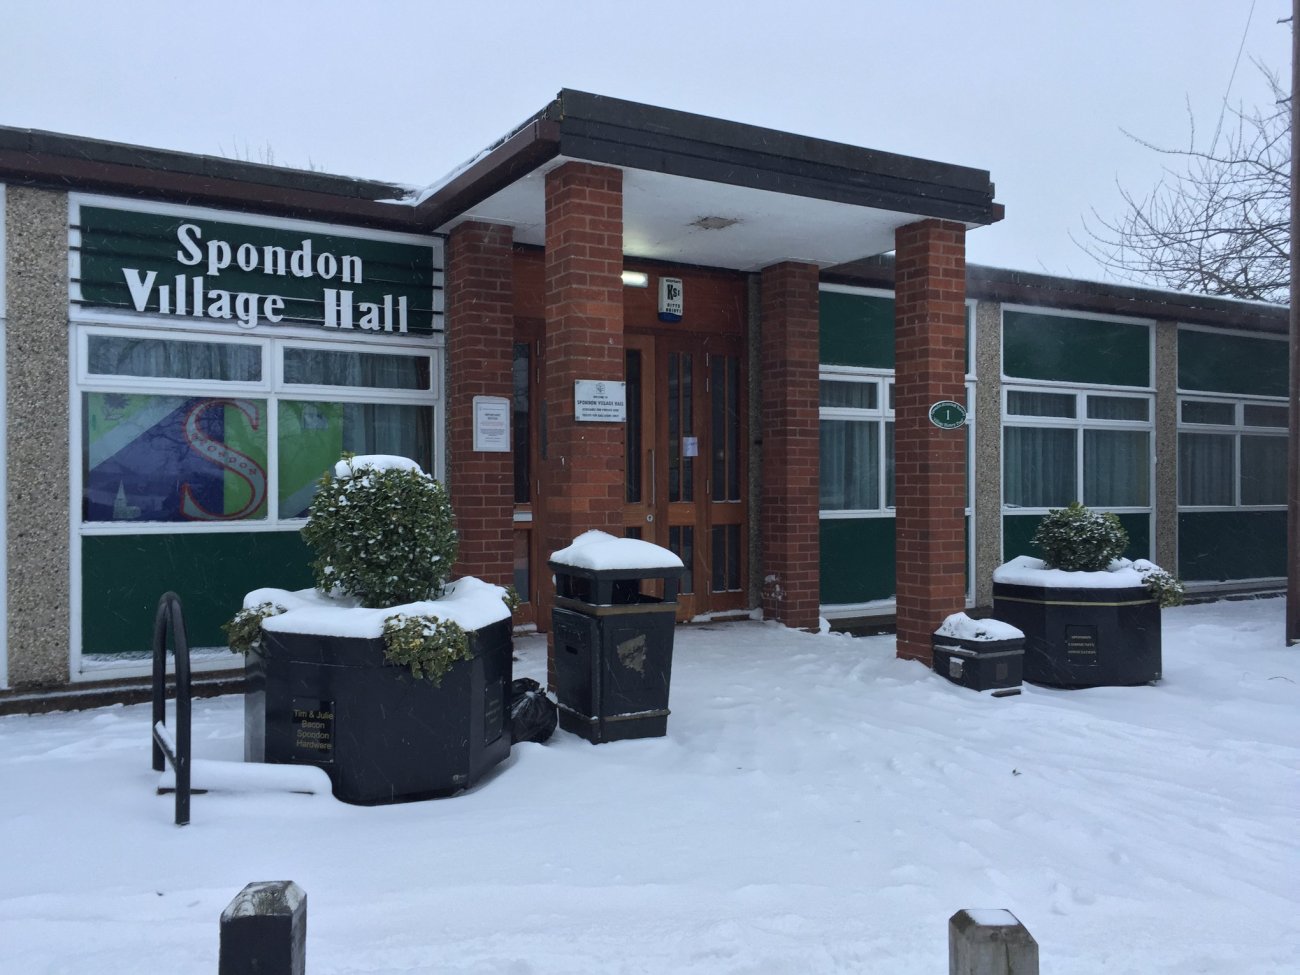 Photograph of Spondon Village Hall in the snow